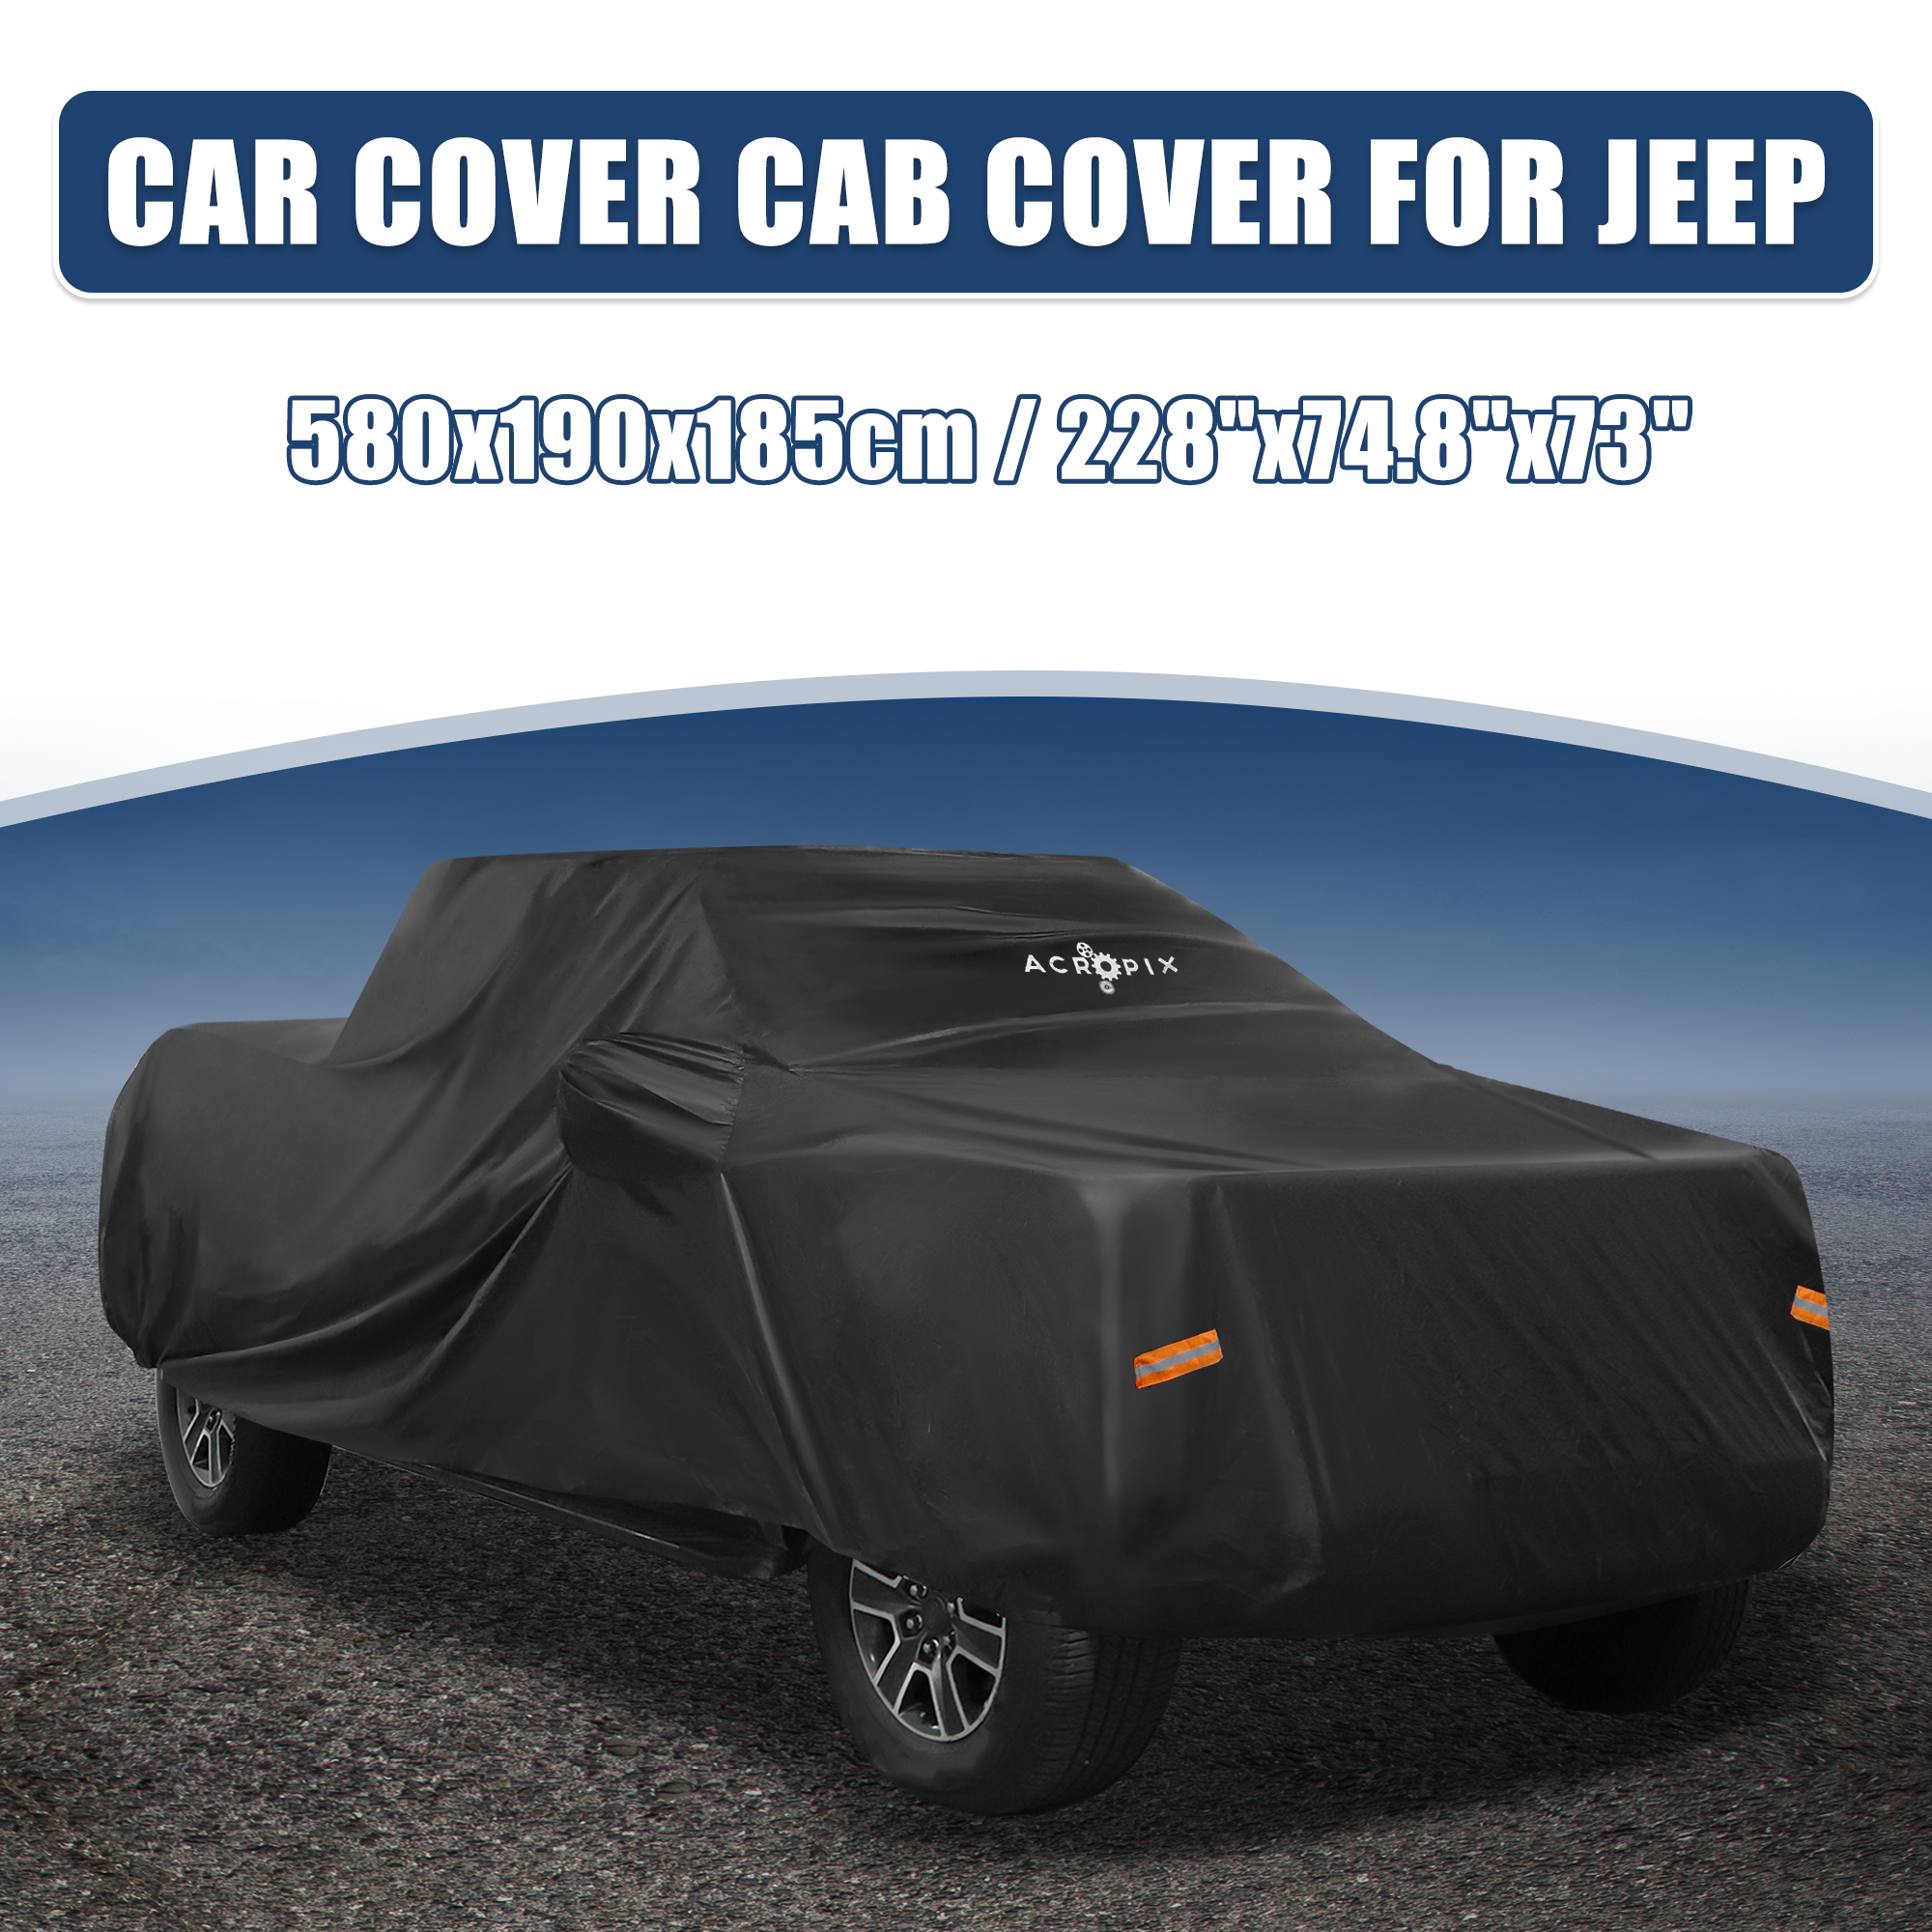 Unique Bargains Pickup Truck Car Cover Fit for Toyota Tacoma Double Cab 4 Door 6.1 Feet Bed - Pack of 1 Black